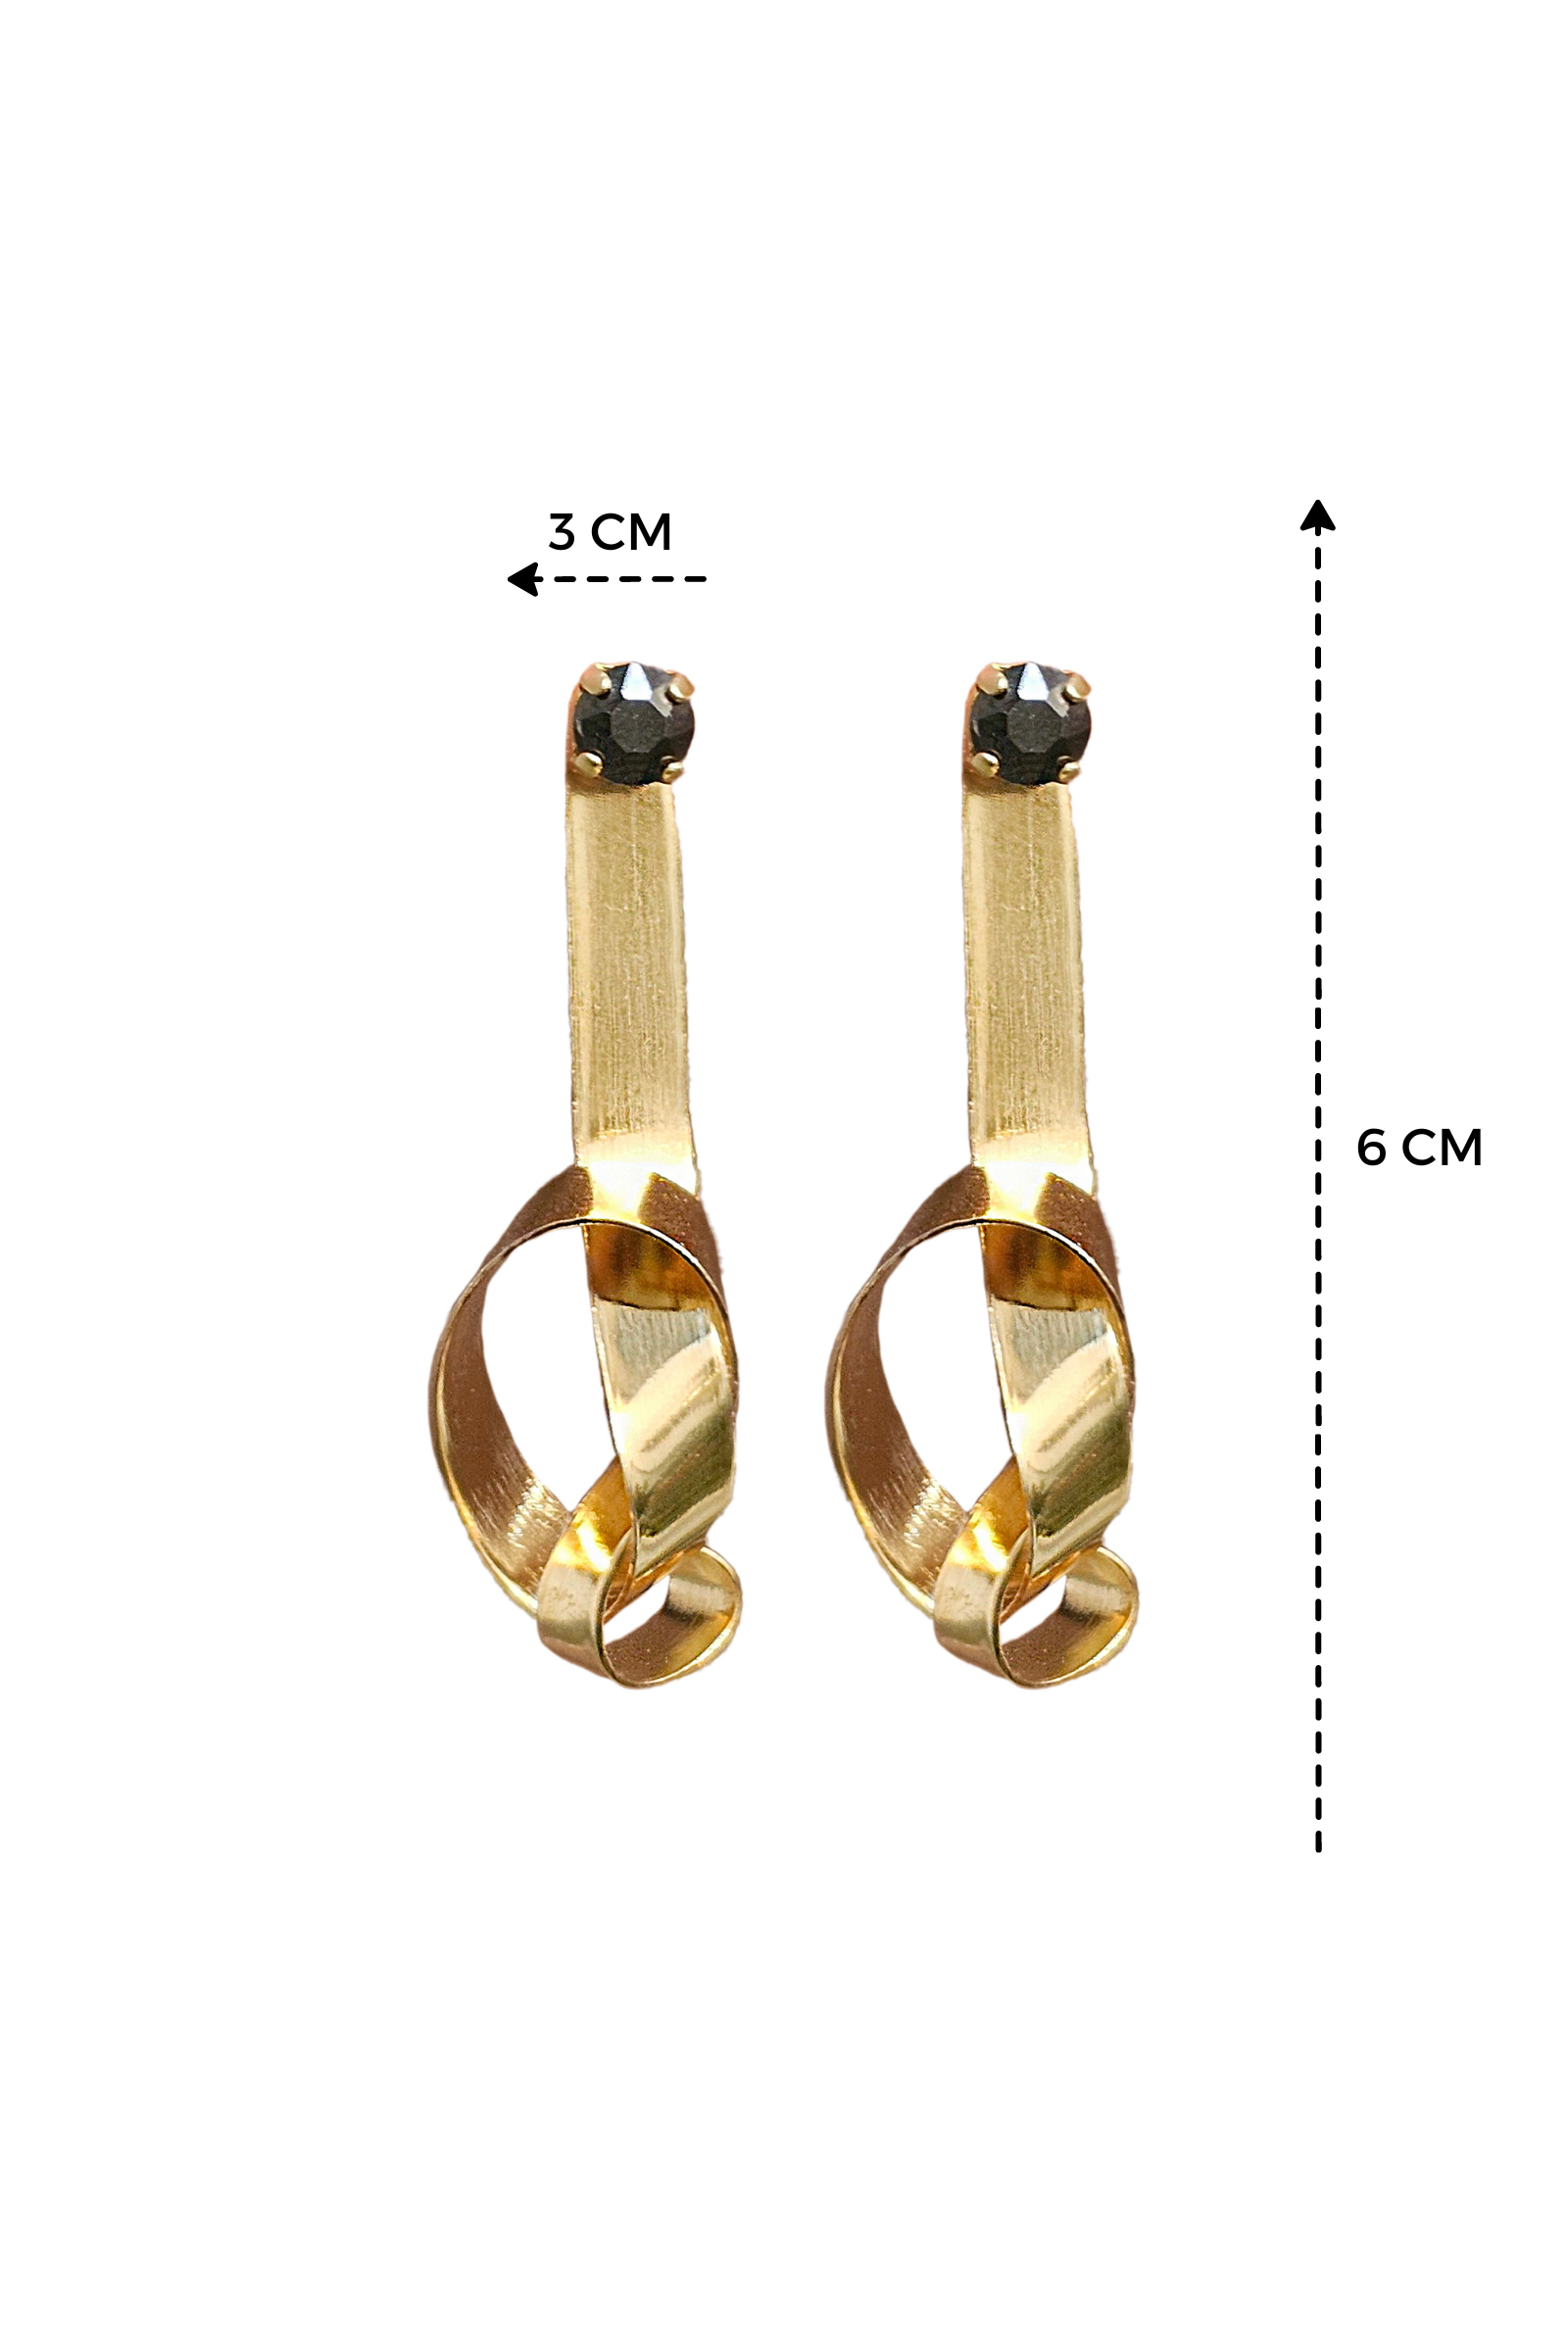 a pair of gold earrings with black stones